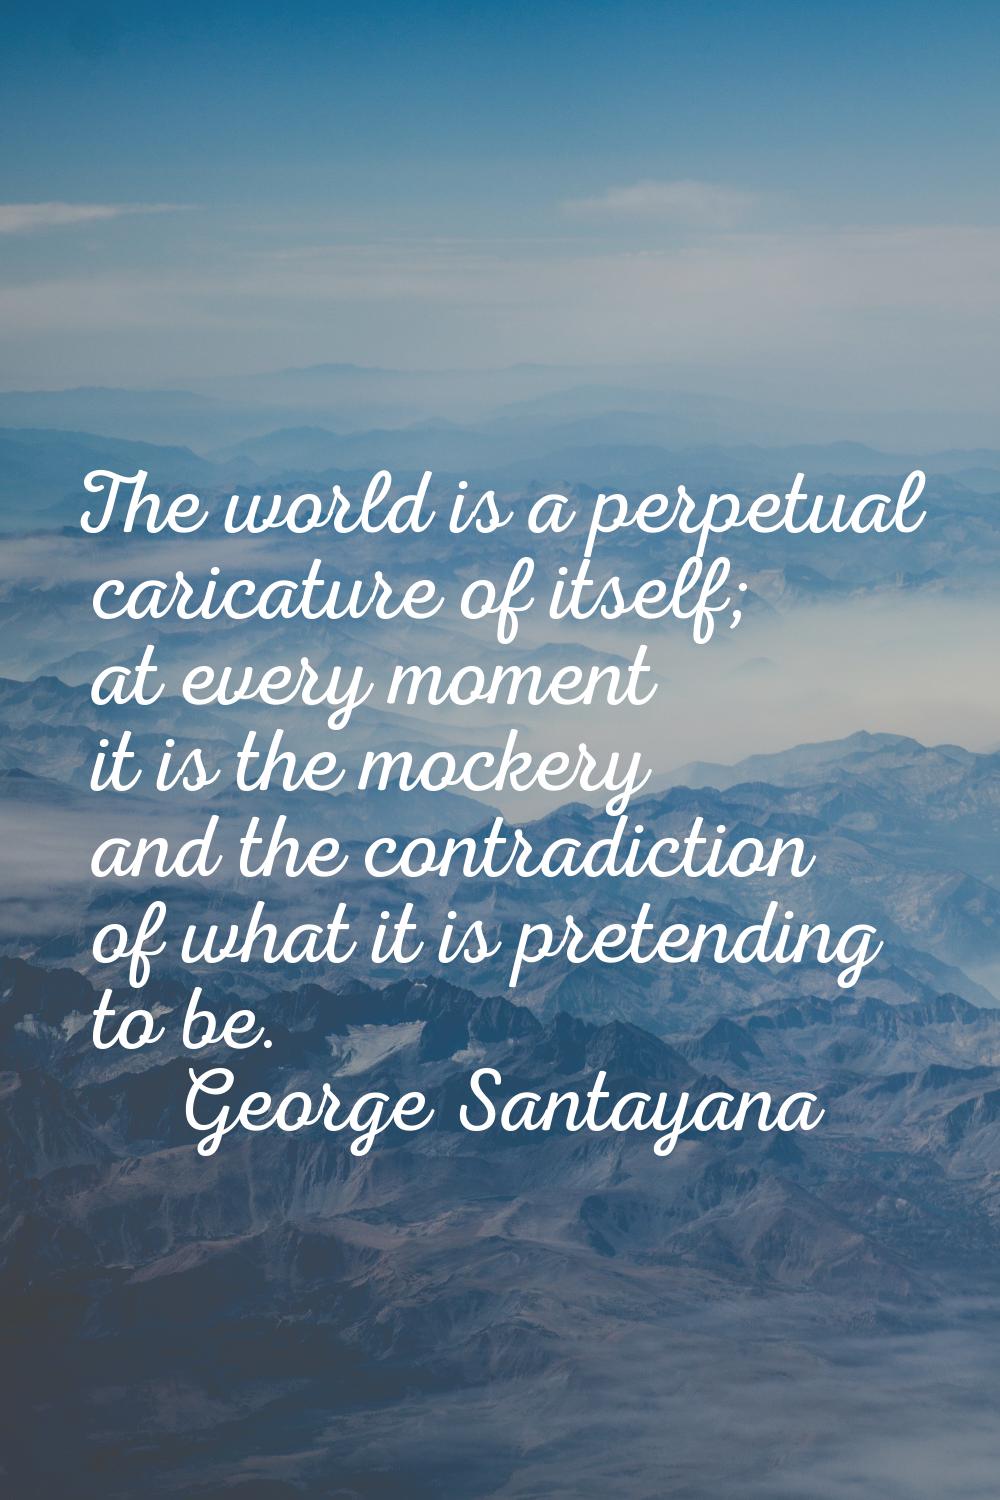 The world is a perpetual caricature of itself; at every moment it is the mockery and the contradict